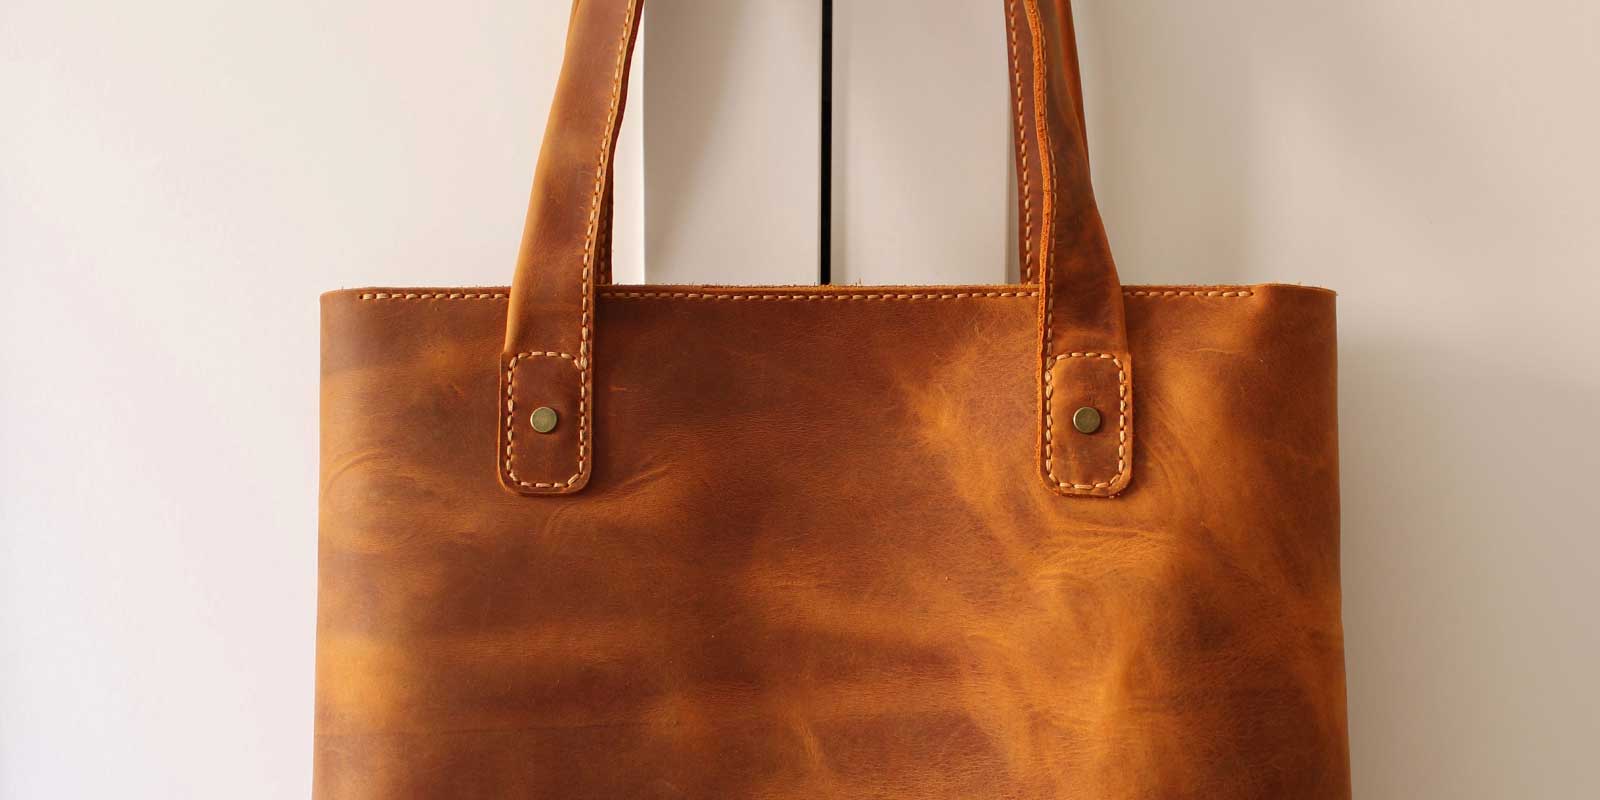 What Is The Difference Between A Tote And A Shoulder Bag?